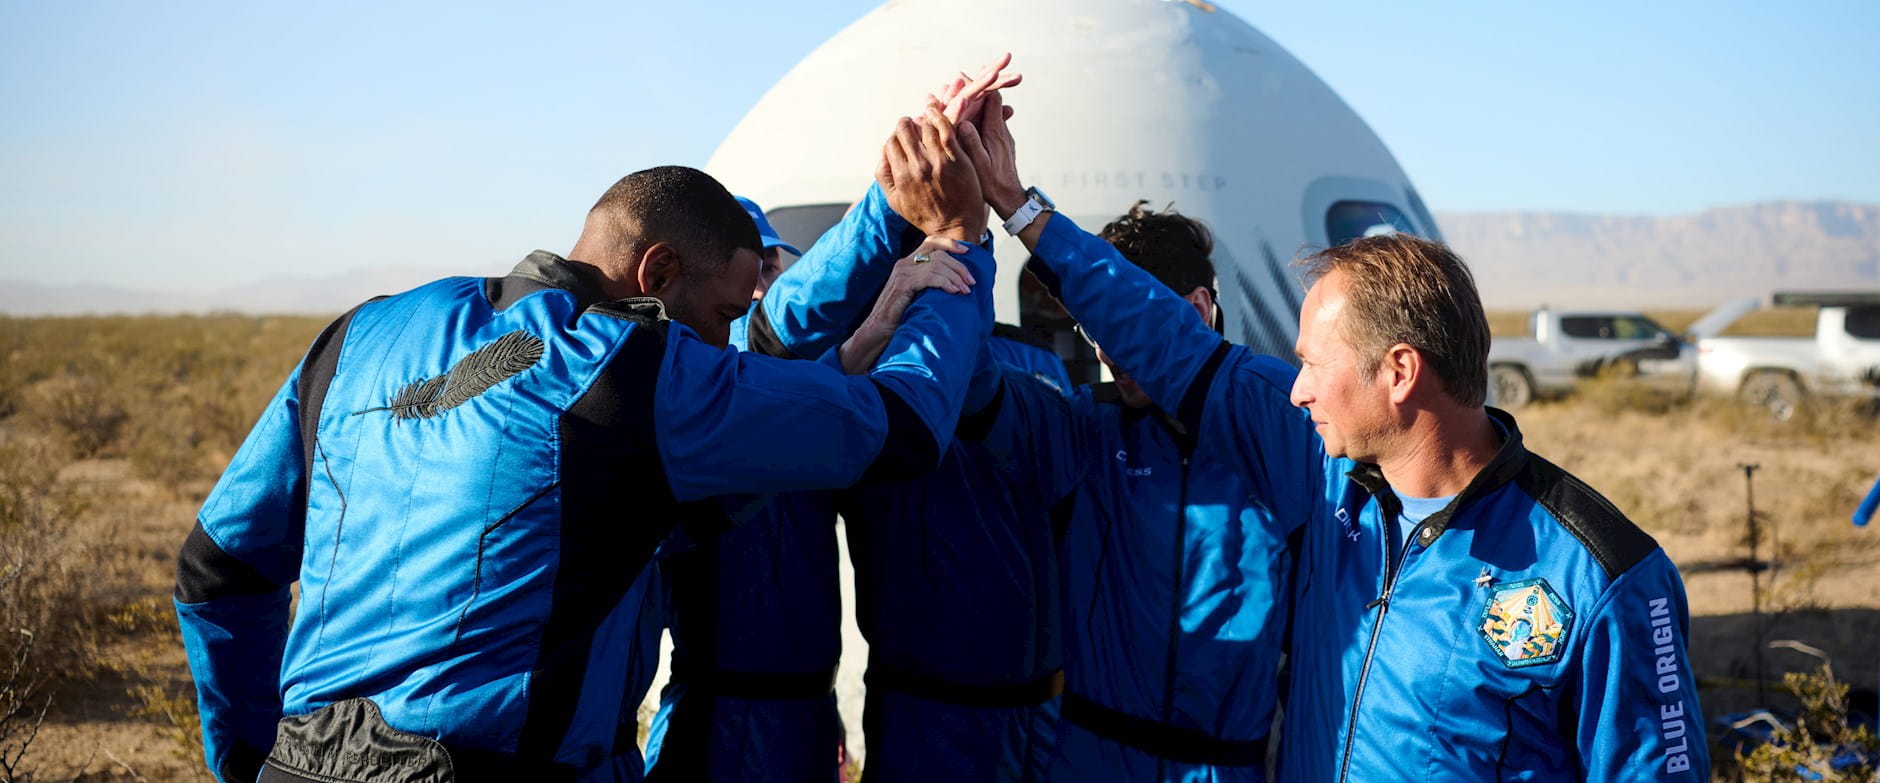 Members of Blue Origin's space exploration program putting their hands together for a team huddle